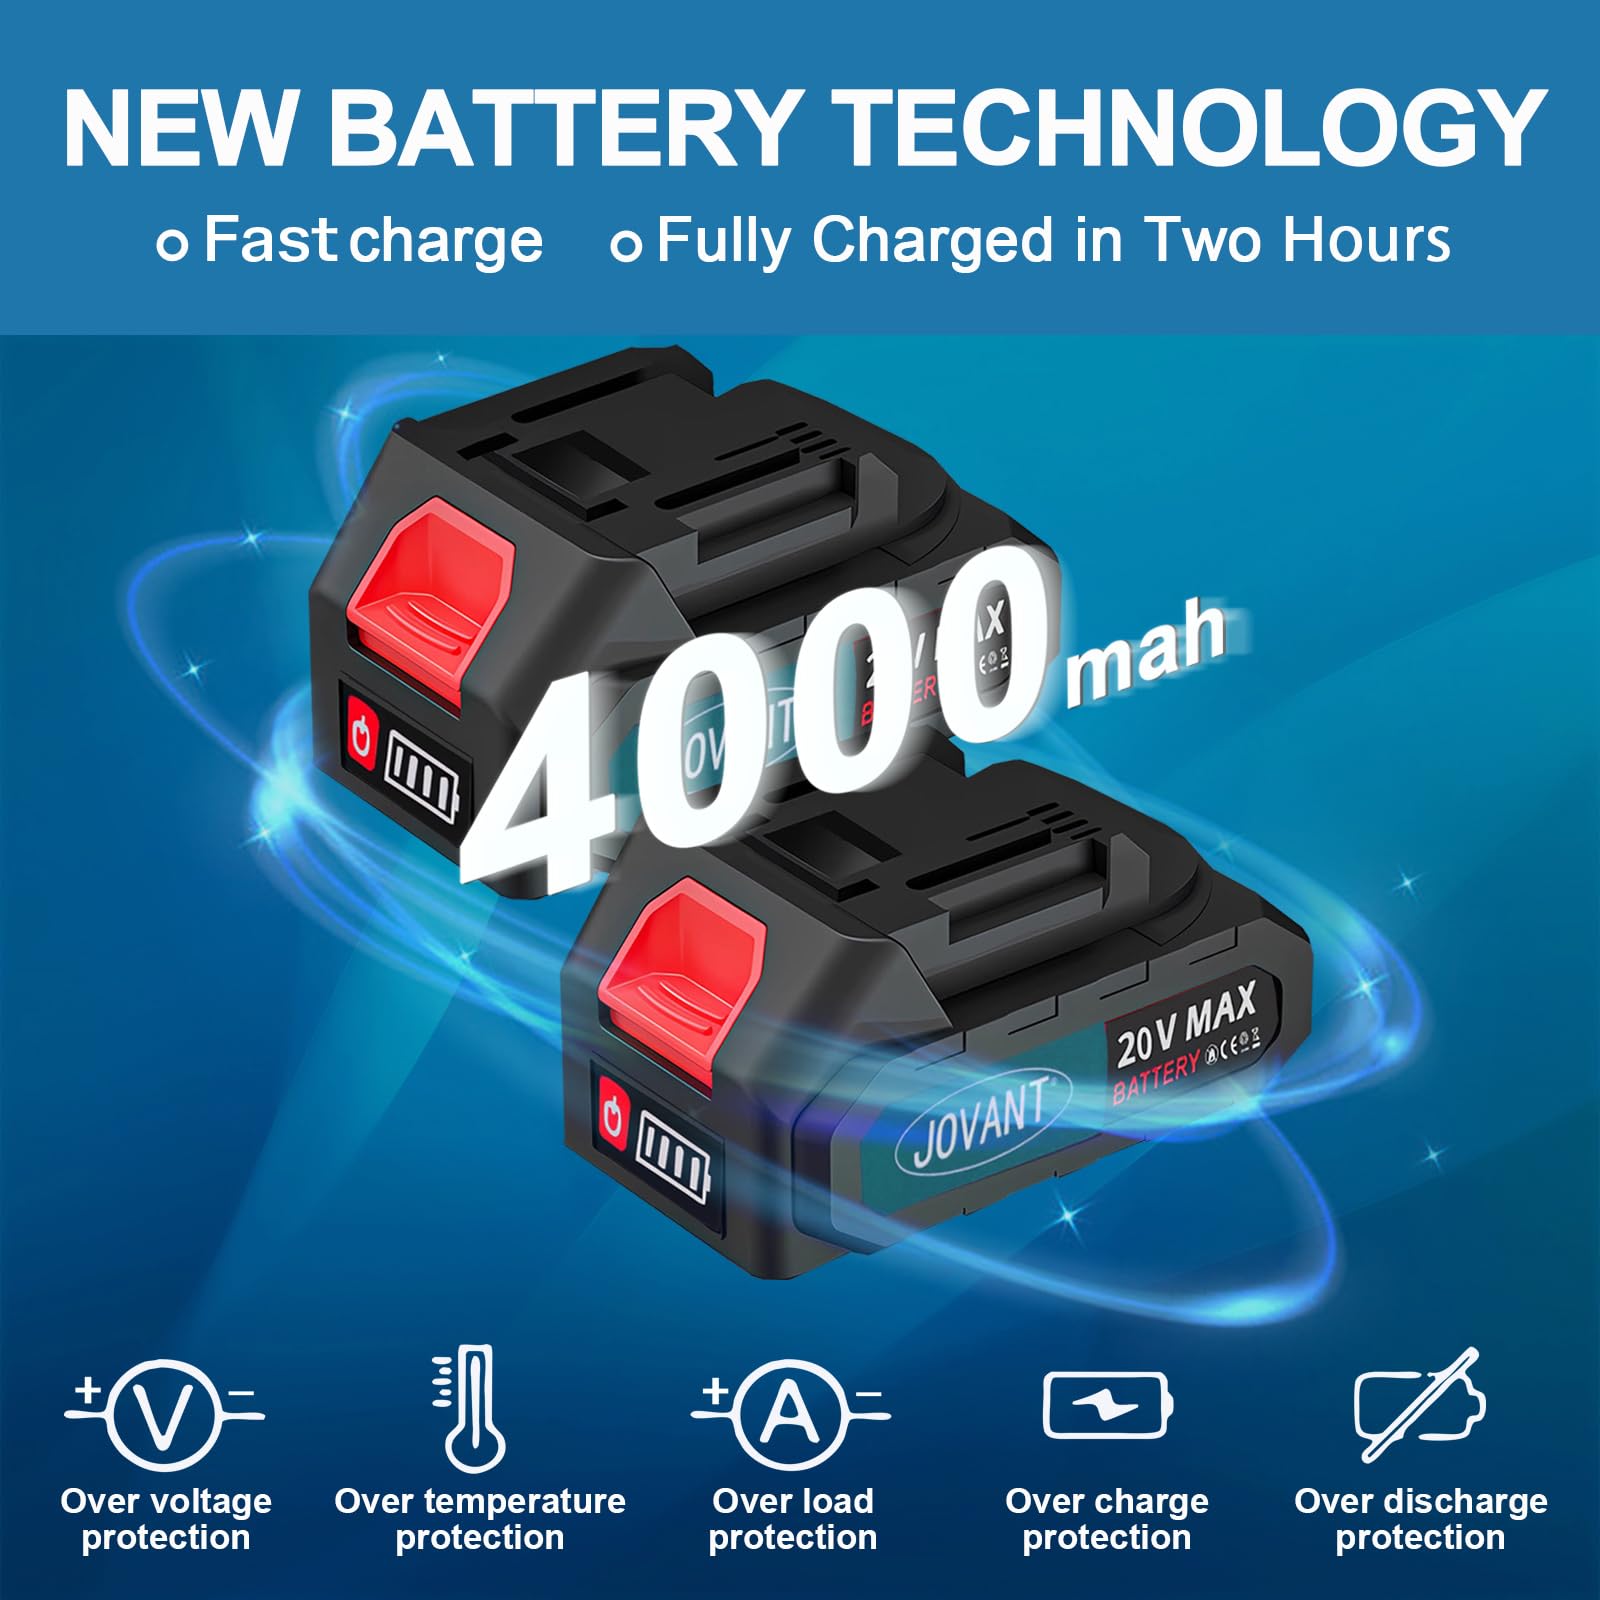 NEW BATTERY TECHNOLOGYo Fast charge o Fully Charged in Two Hours  Over voltage protection over temperature protection over load protection over charge protection over discharge protection